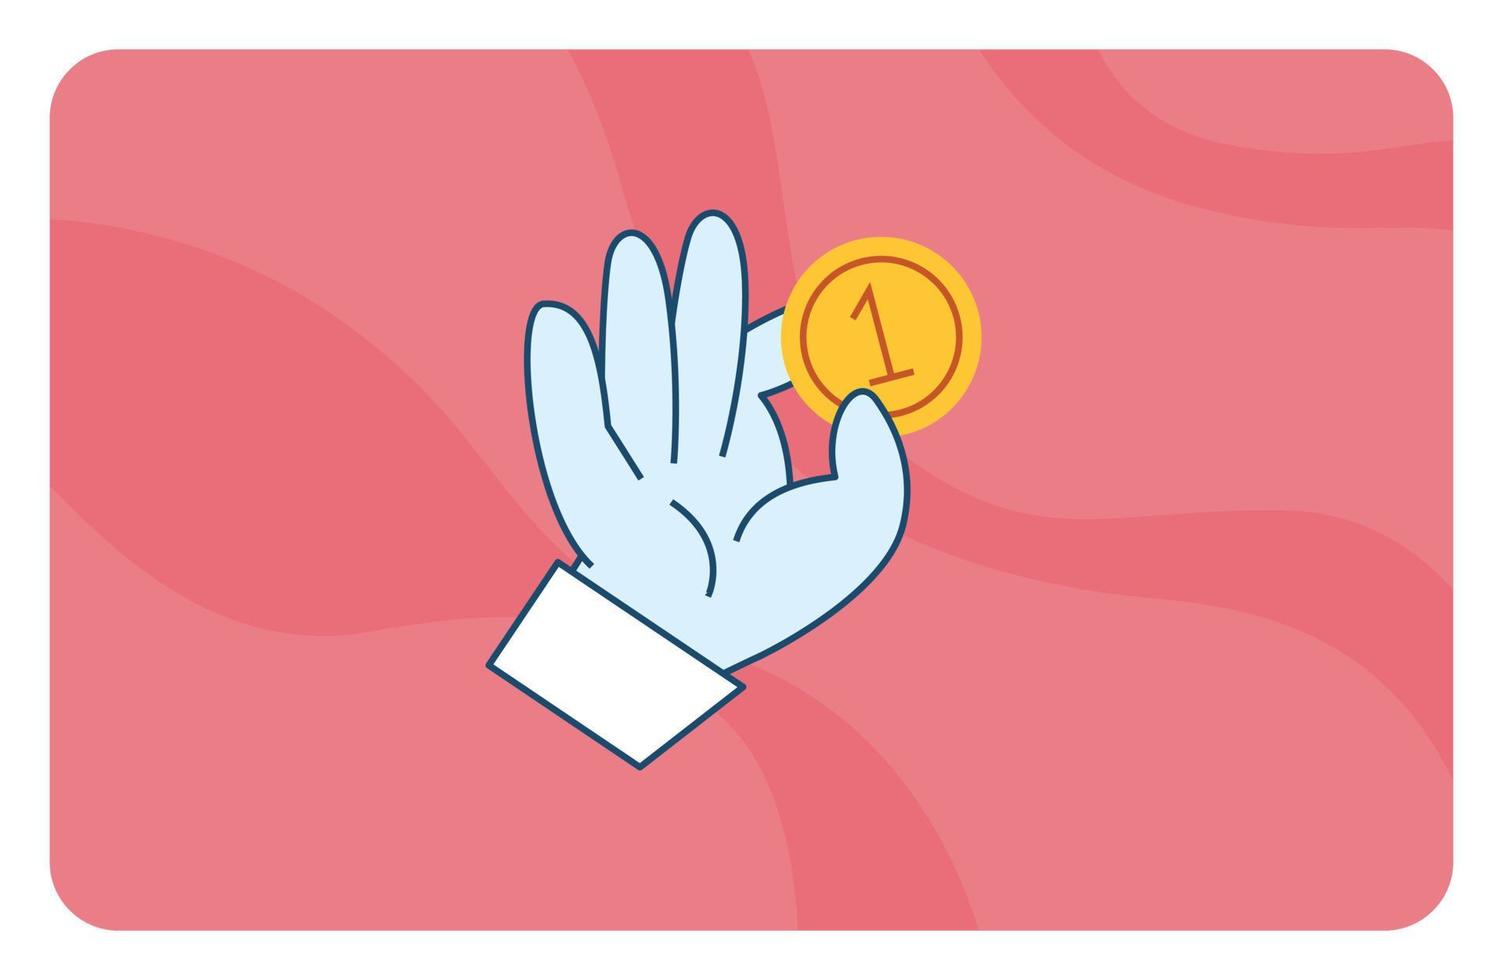 Cartoon hand holding golden coin vector eps. A metal coin in palm flat design illustration, on a red background.